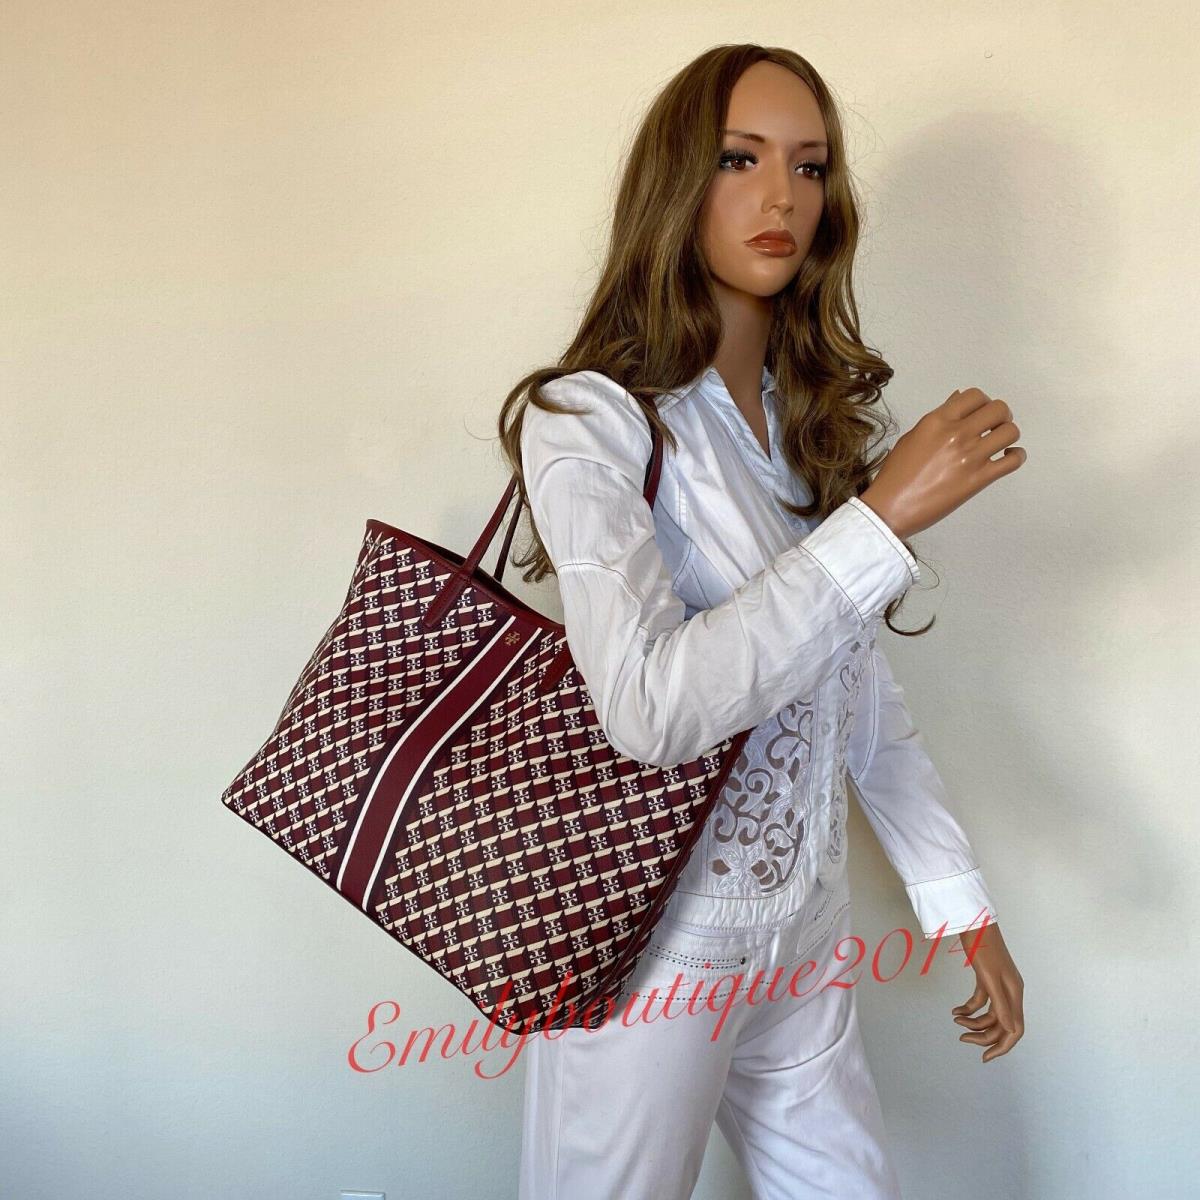 Tory Burch 89762 Geo Logo with Stripe Tote IN Crimson Red Canvas Leather Bag  - Tory Burch bag - 038468532207 | Fash Brands